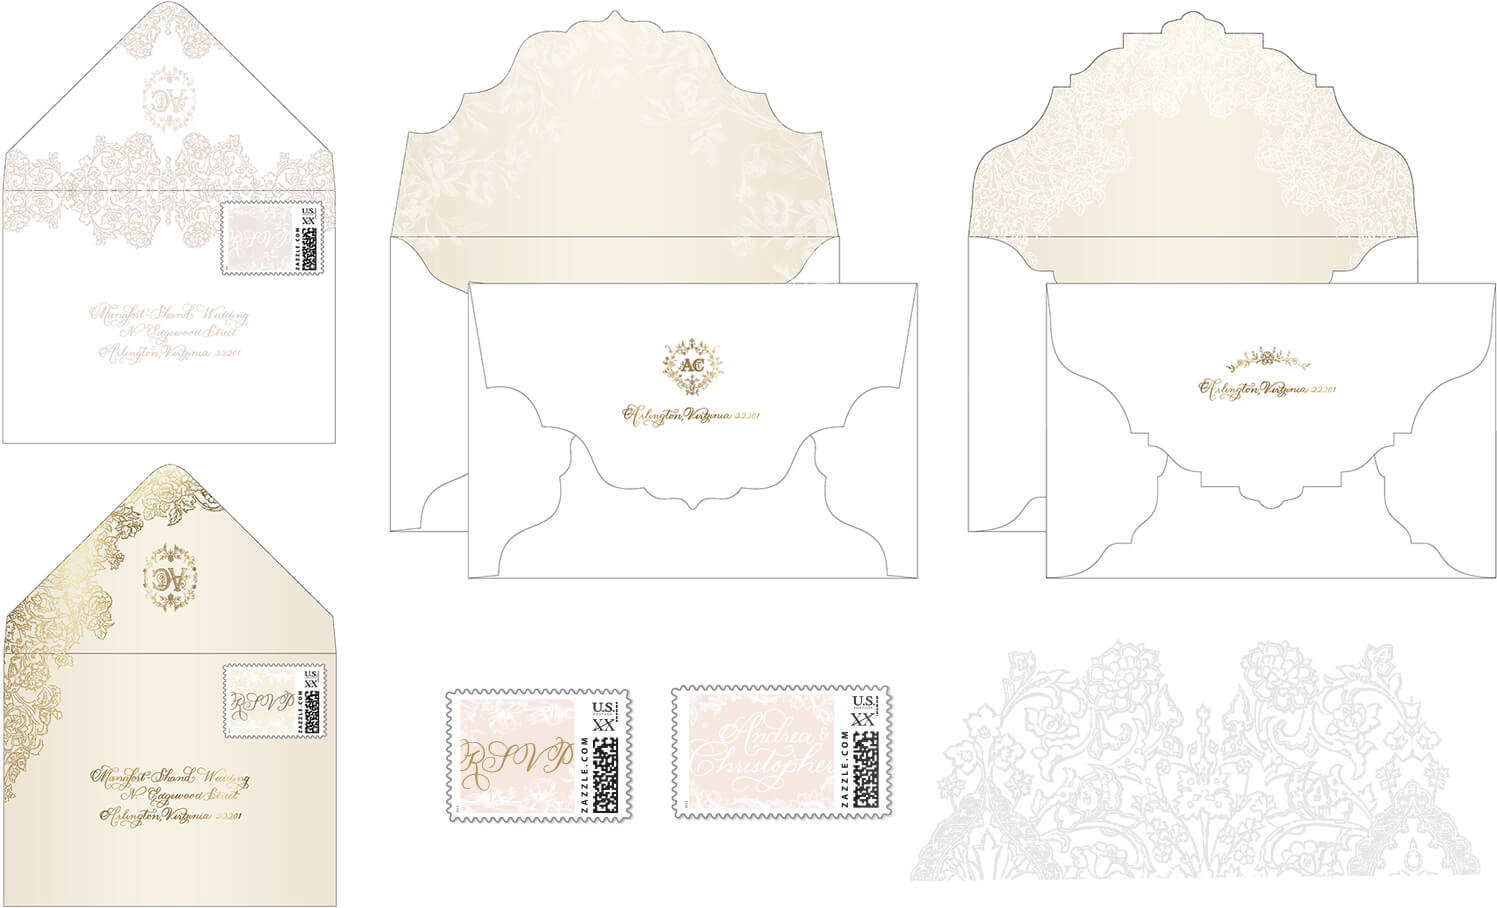 Custom designed envelope, stamps and reply envelope